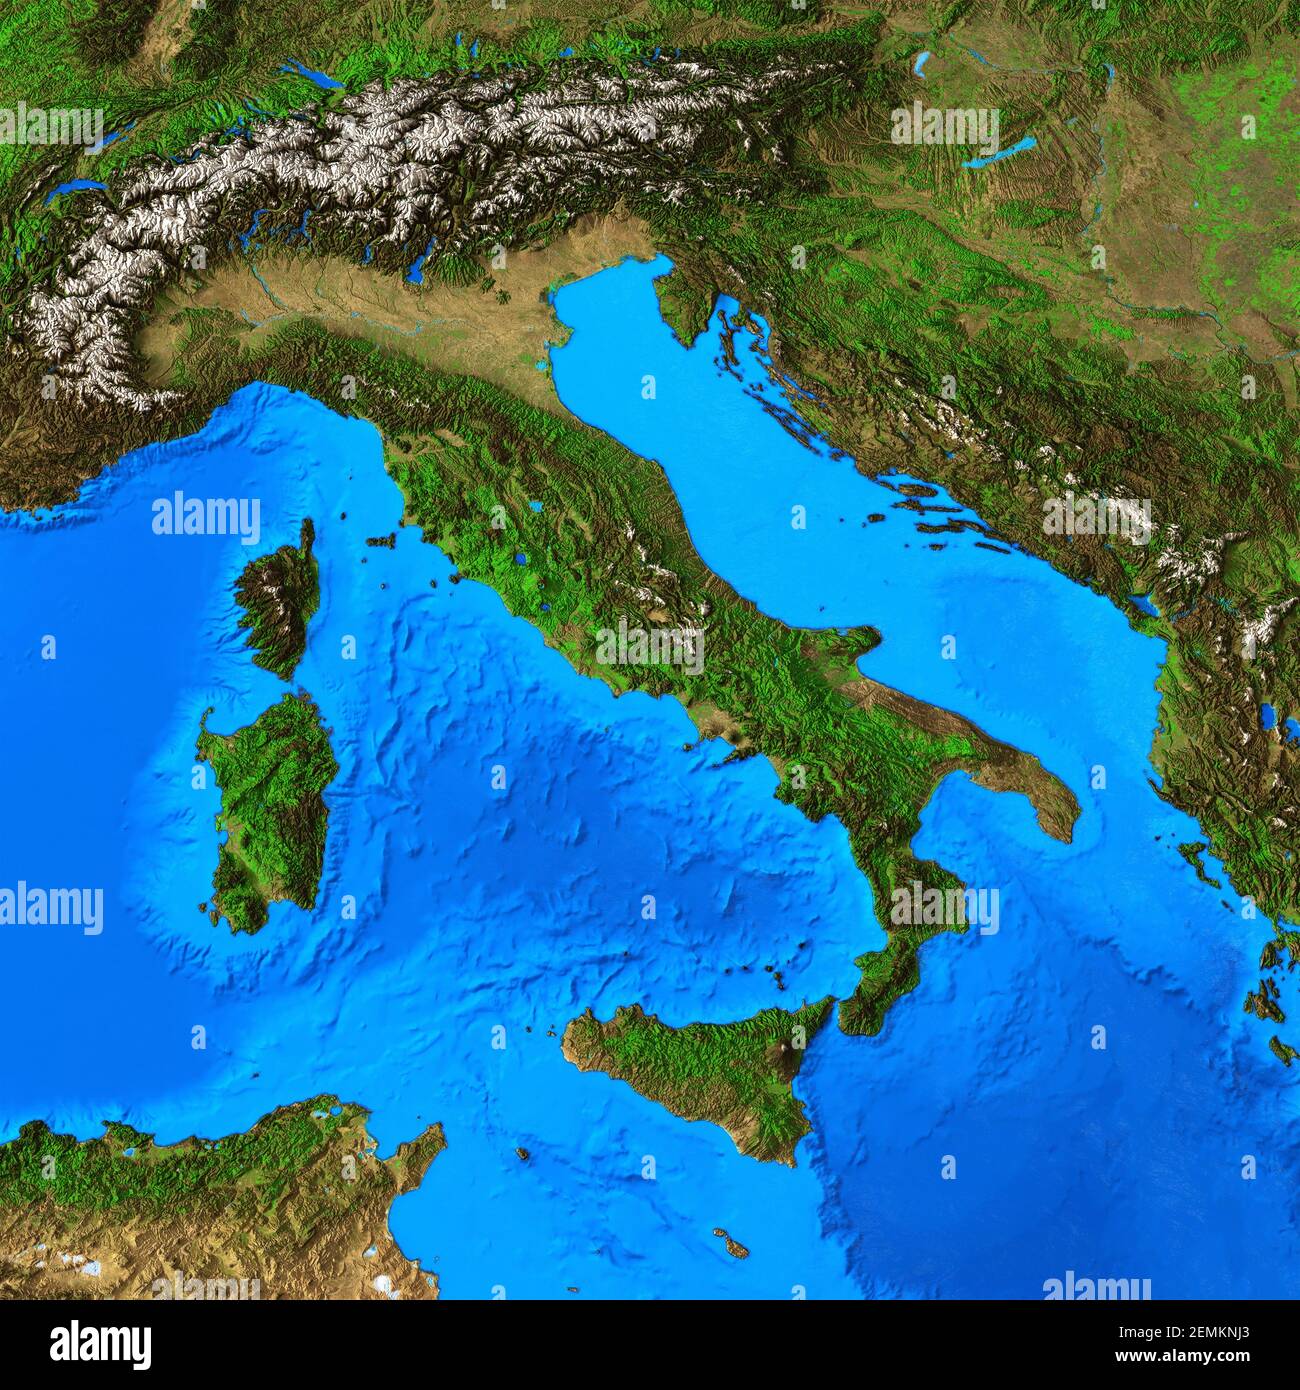 Physical map of Italy and Italian region. Detailed flat view of the Planet Earth and its landforms - Elements furnished by NASA Stock Photo